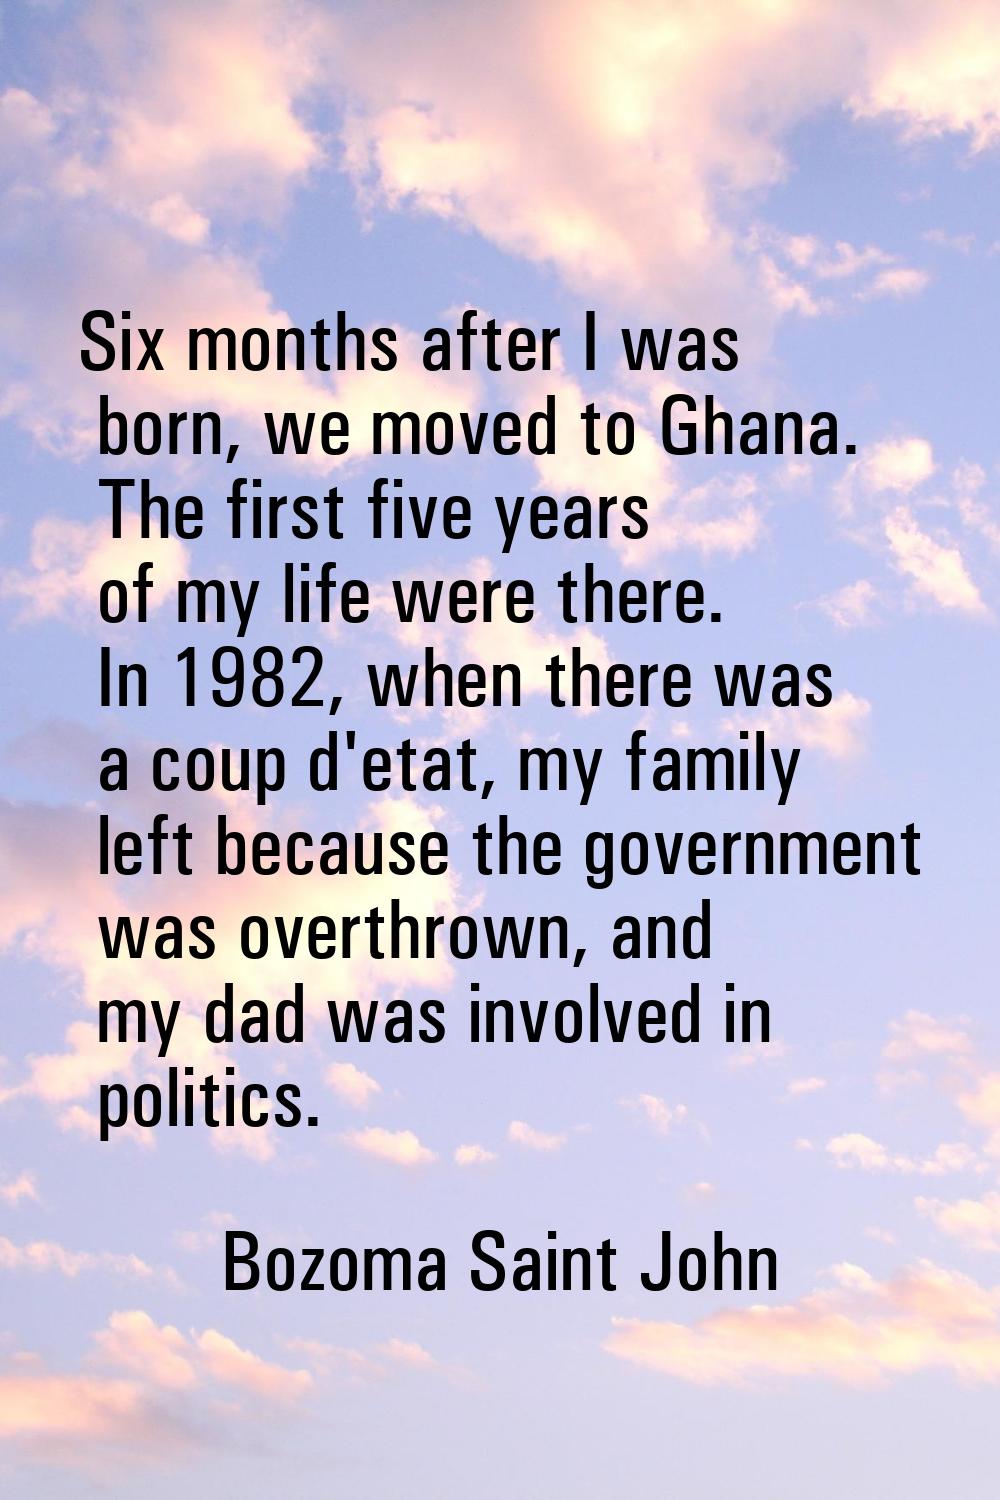 Six months after I was born, we moved to Ghana. The first five years of my life were there. In 1982